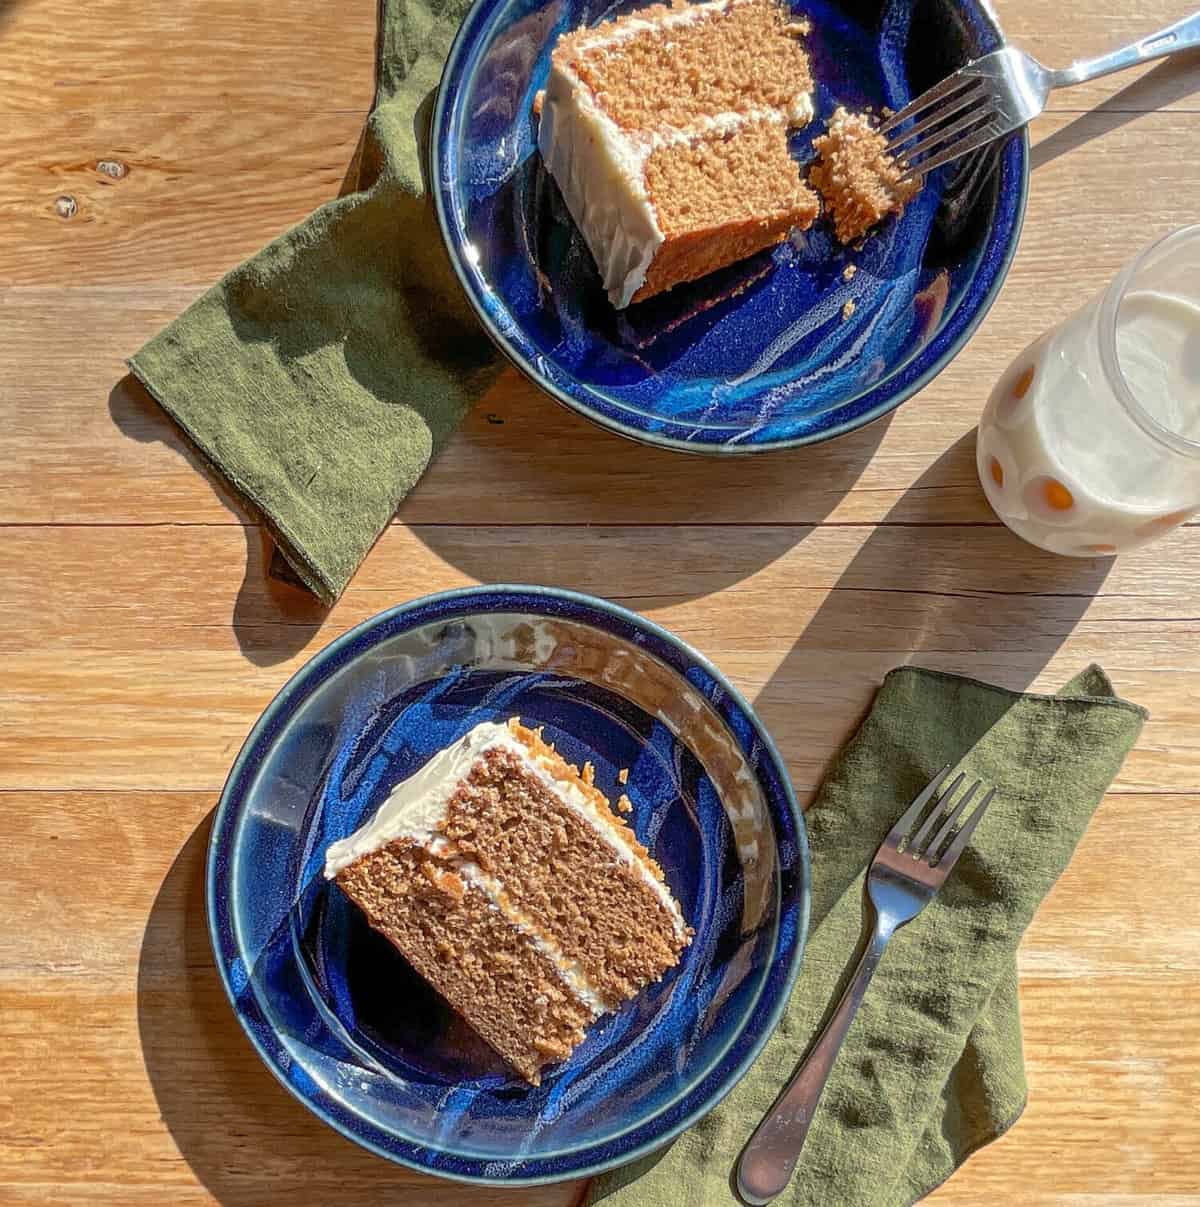 two pieces of applesauce cake on plates with forks and a milk glass.